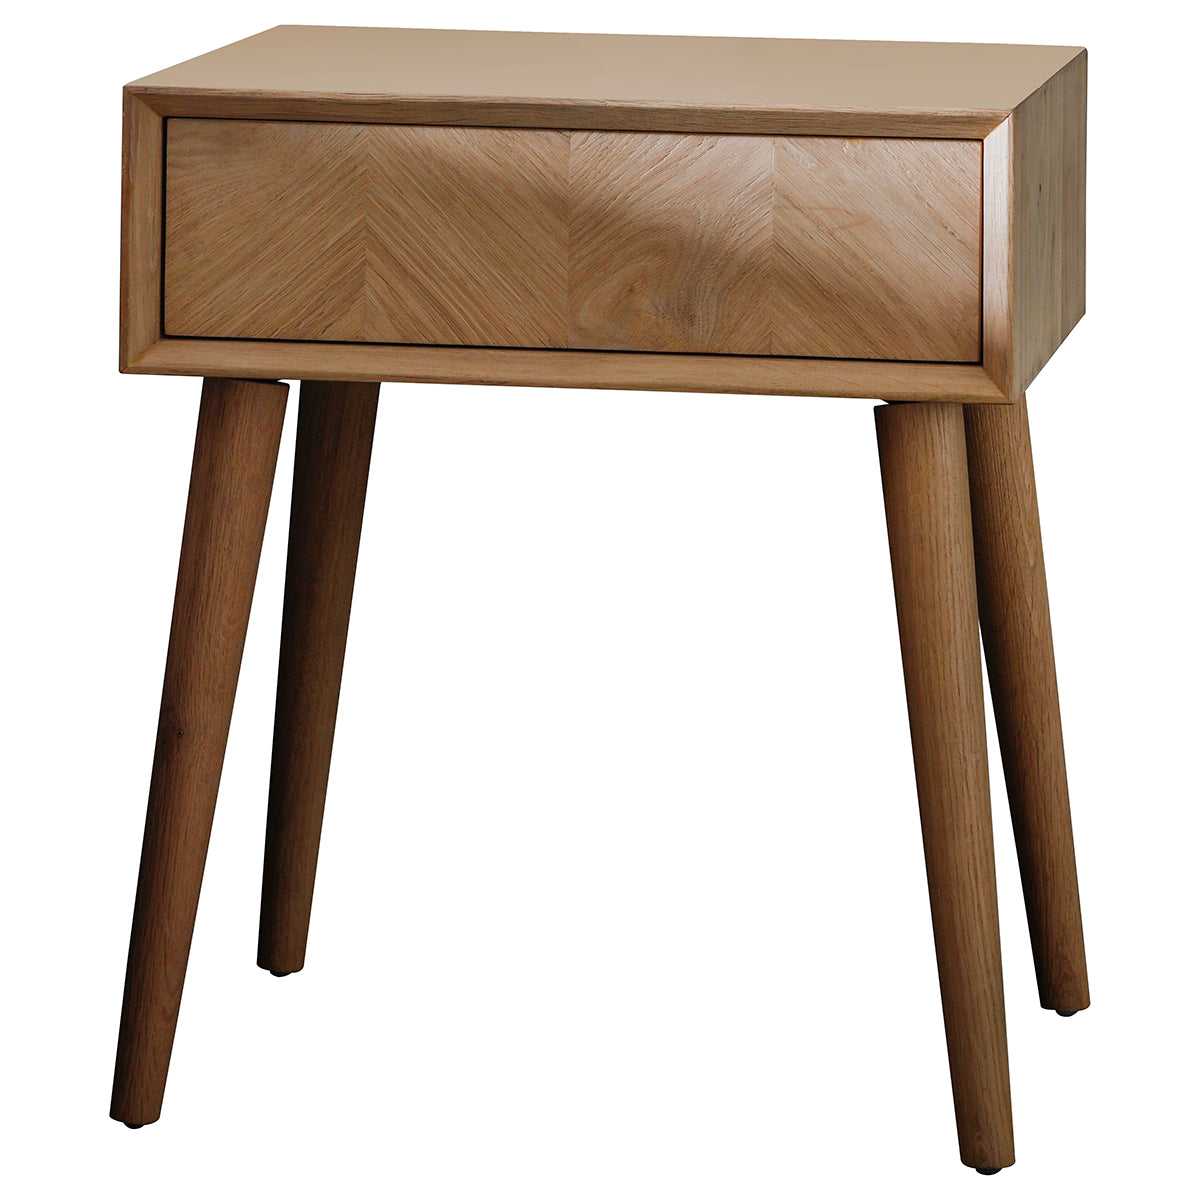 A Tristford 1 Drawer Side Table 500x410x600mm by Kikiathome.co.uk, a stylish home furniture piece with two drawers, perfect for interior decor.